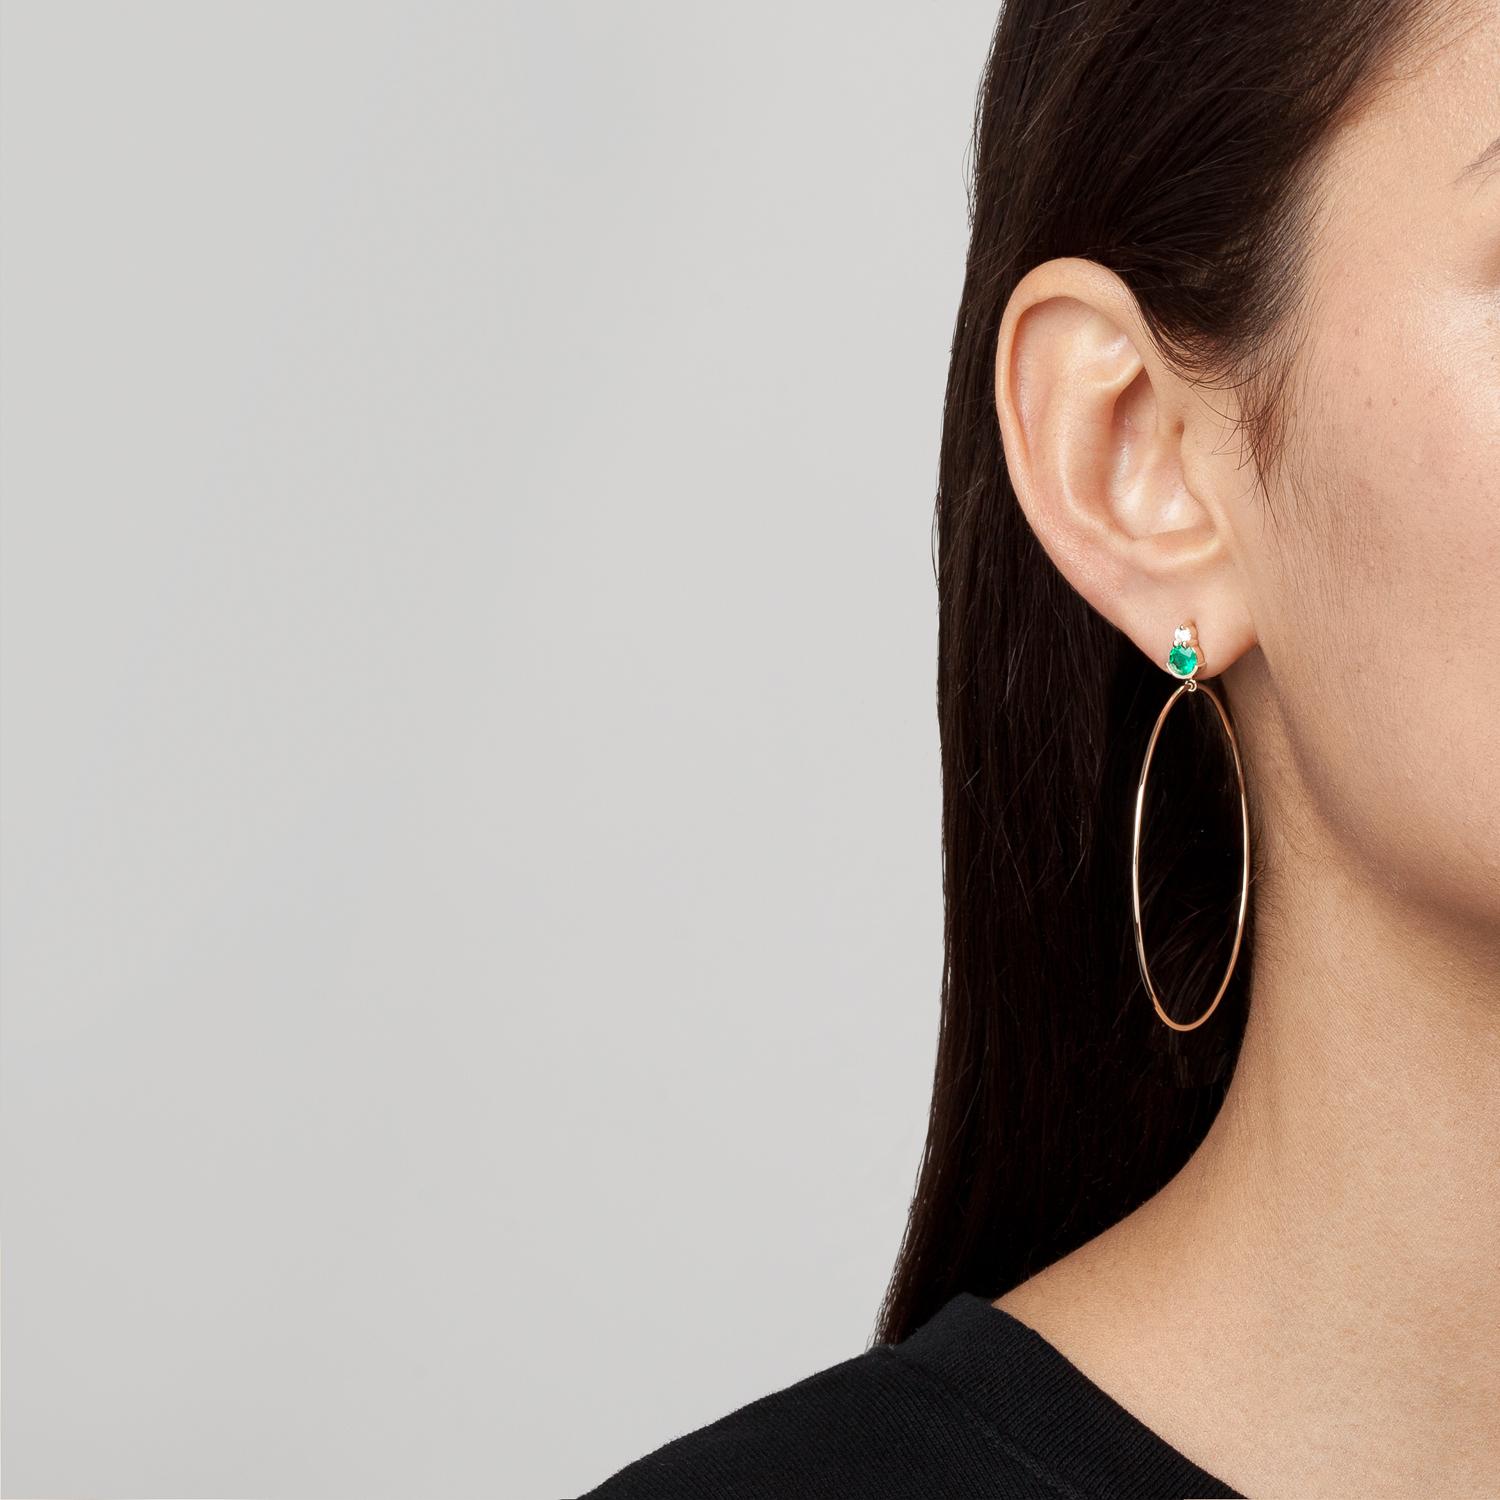 A stud and hoop hybrid, SELIN KENT's wearable Ayda Earrings make a subtle statement. Featuring stunning green emeralds with diamond accents and a 2'' gold hoop. 

Hoops measure 2'' / 5cm in diameter. 
Emerald carat weight: 0.9-1 carat
Diamond carat